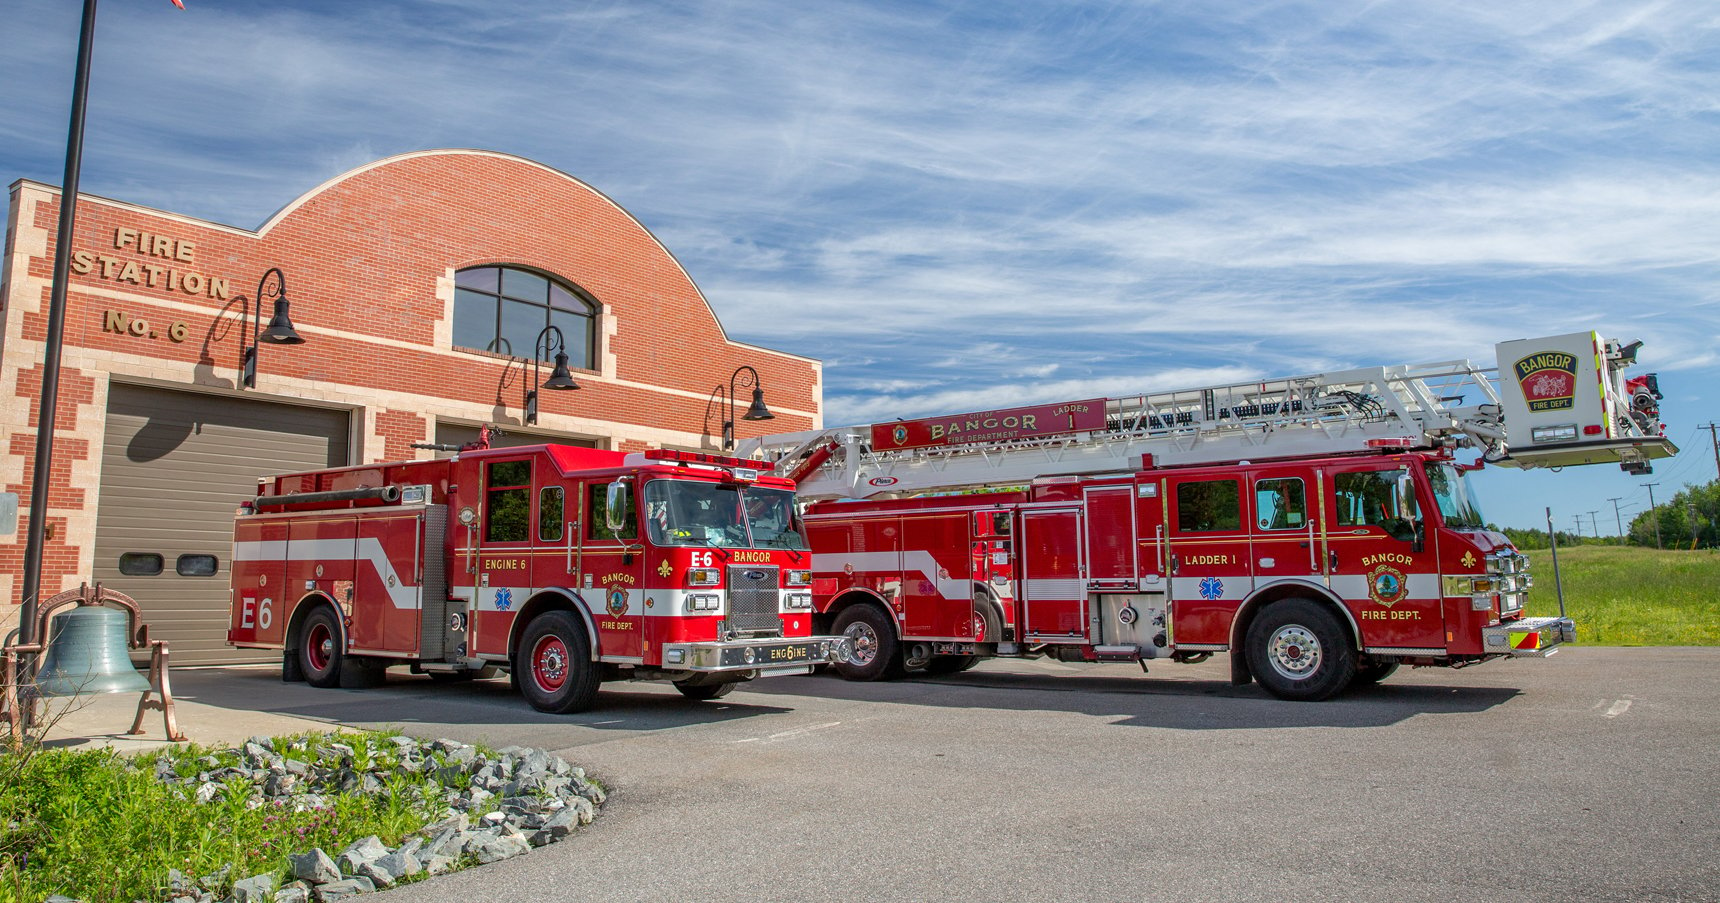 Types of Fire Trucks: An Overview and Comparison